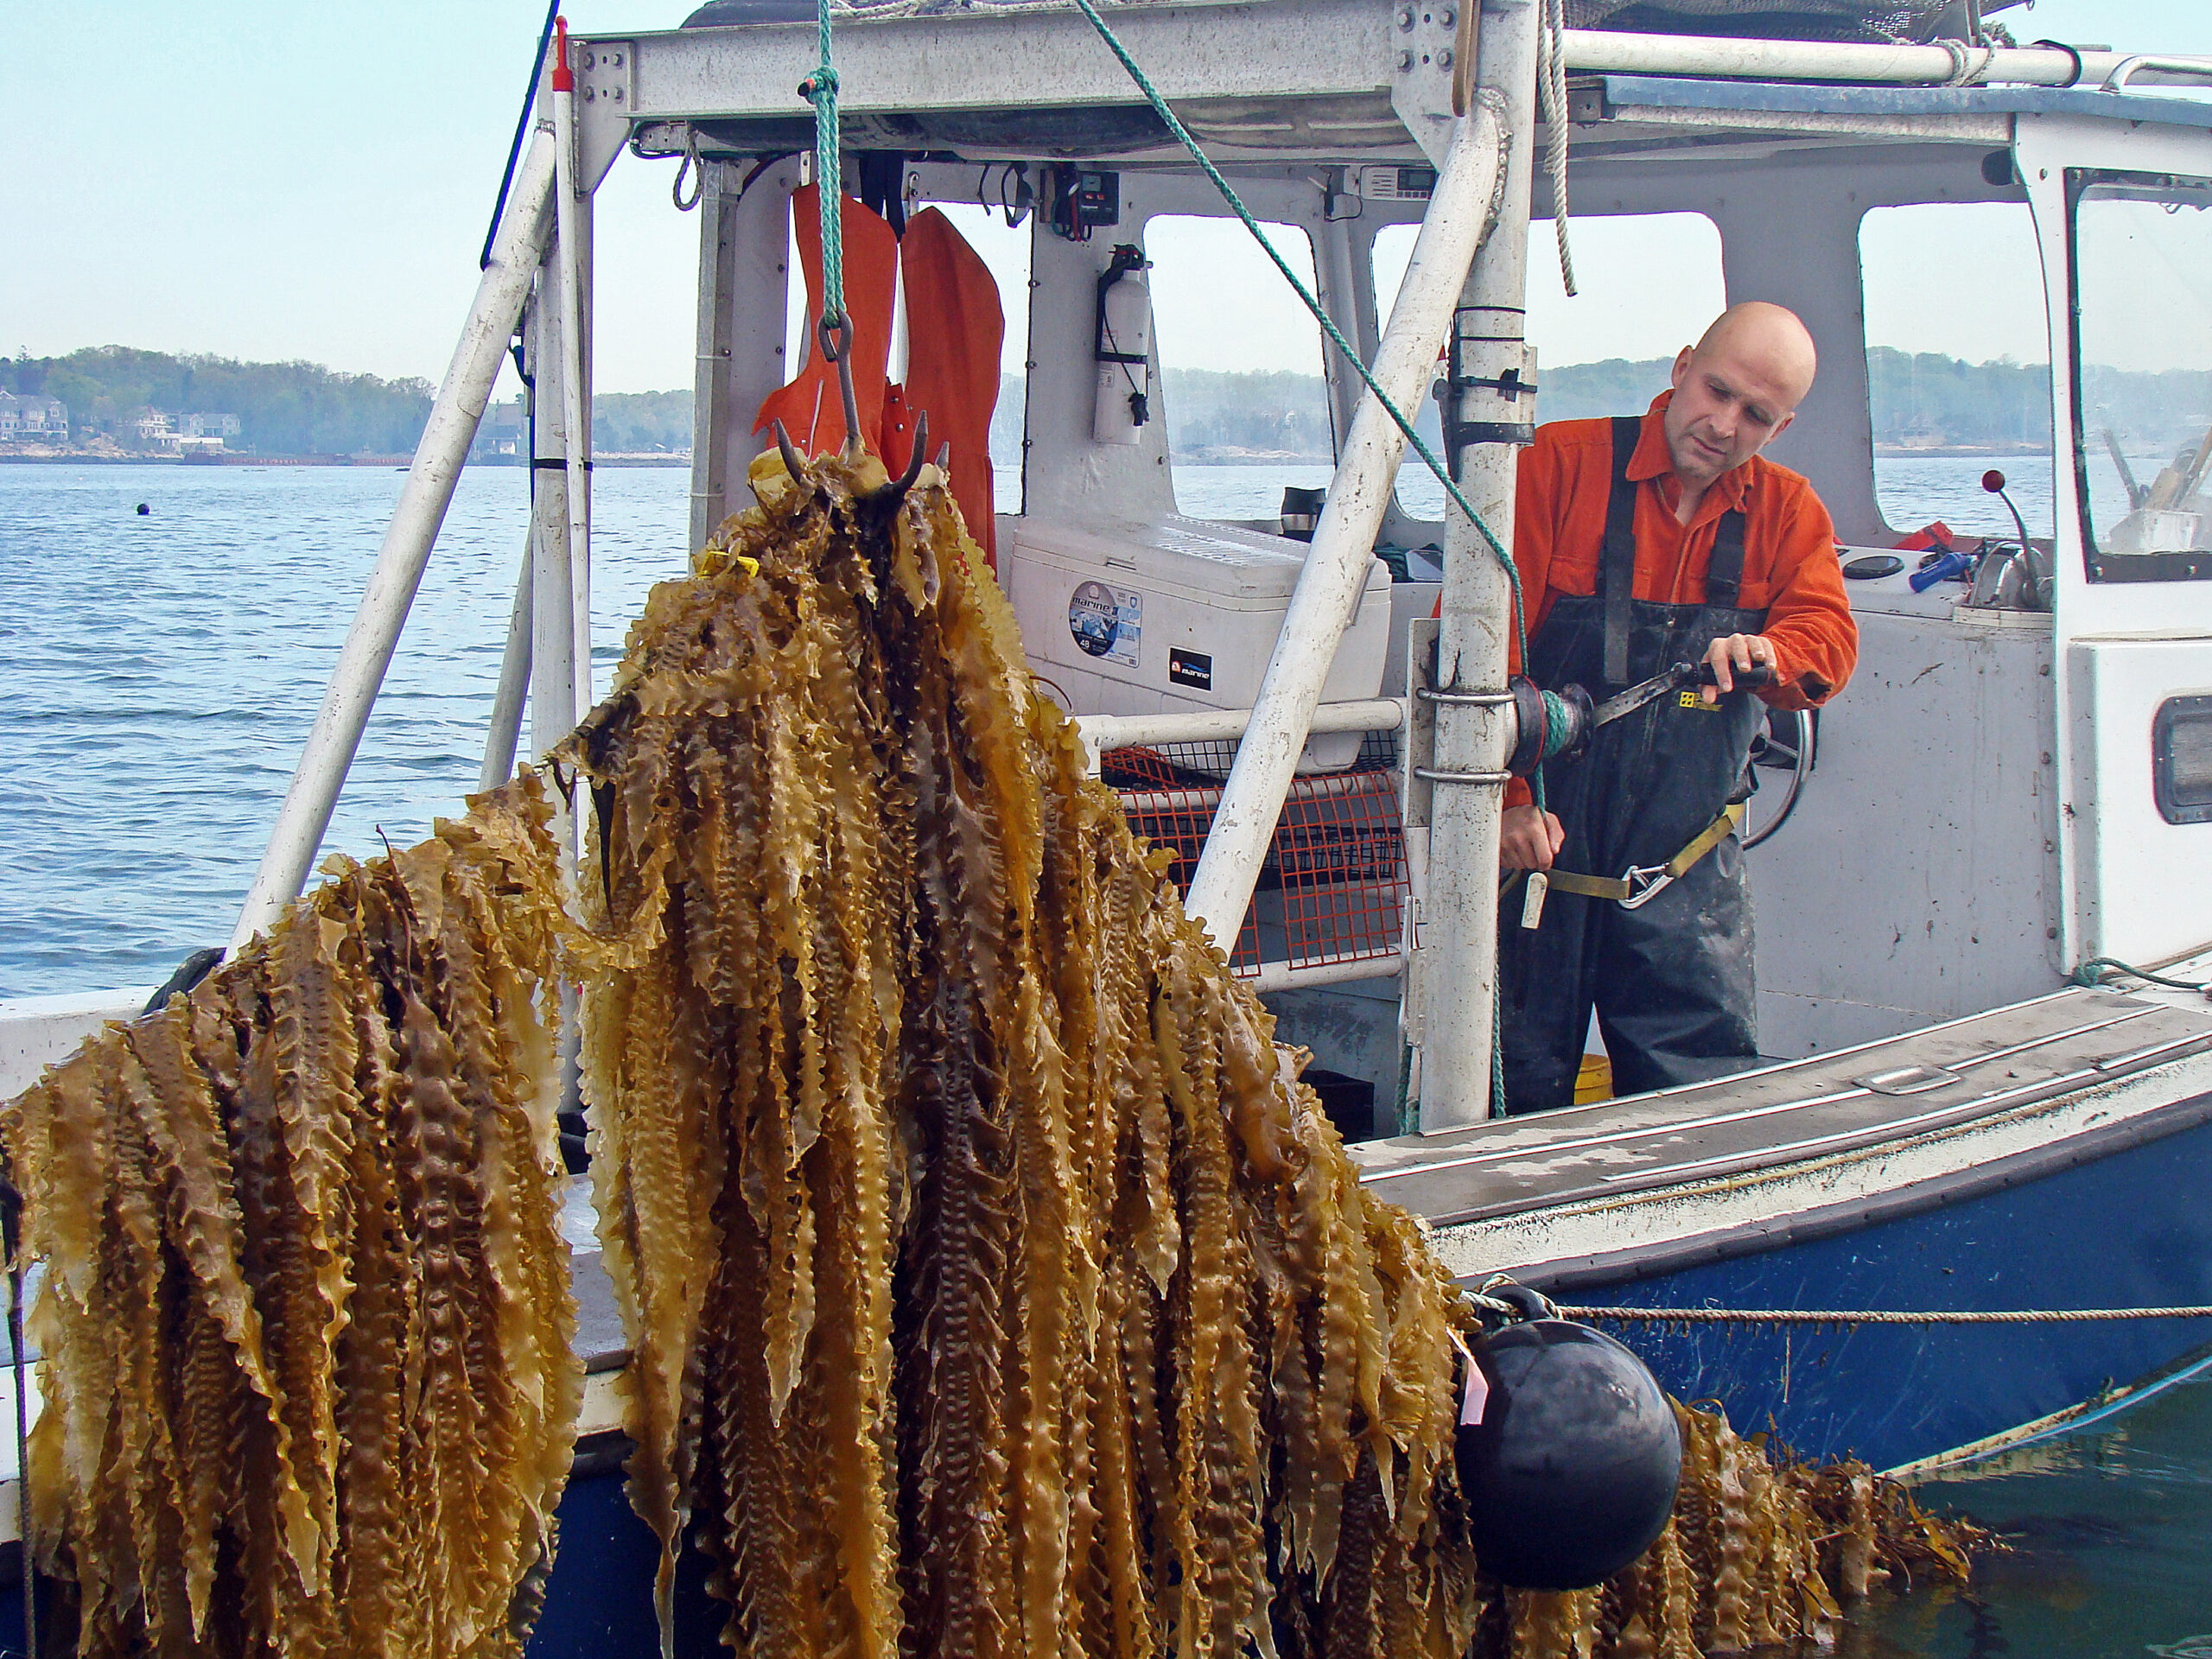 New York State Governor Kathy Hochul vetoed a bill last month that would have permitted leasing of state-owned underwater land for seaweed cultivation. New York State Assemblyman Fred Thiele had supported the bill, which would have expanded kelp cultivation. COURTESY OF GREENWAVE